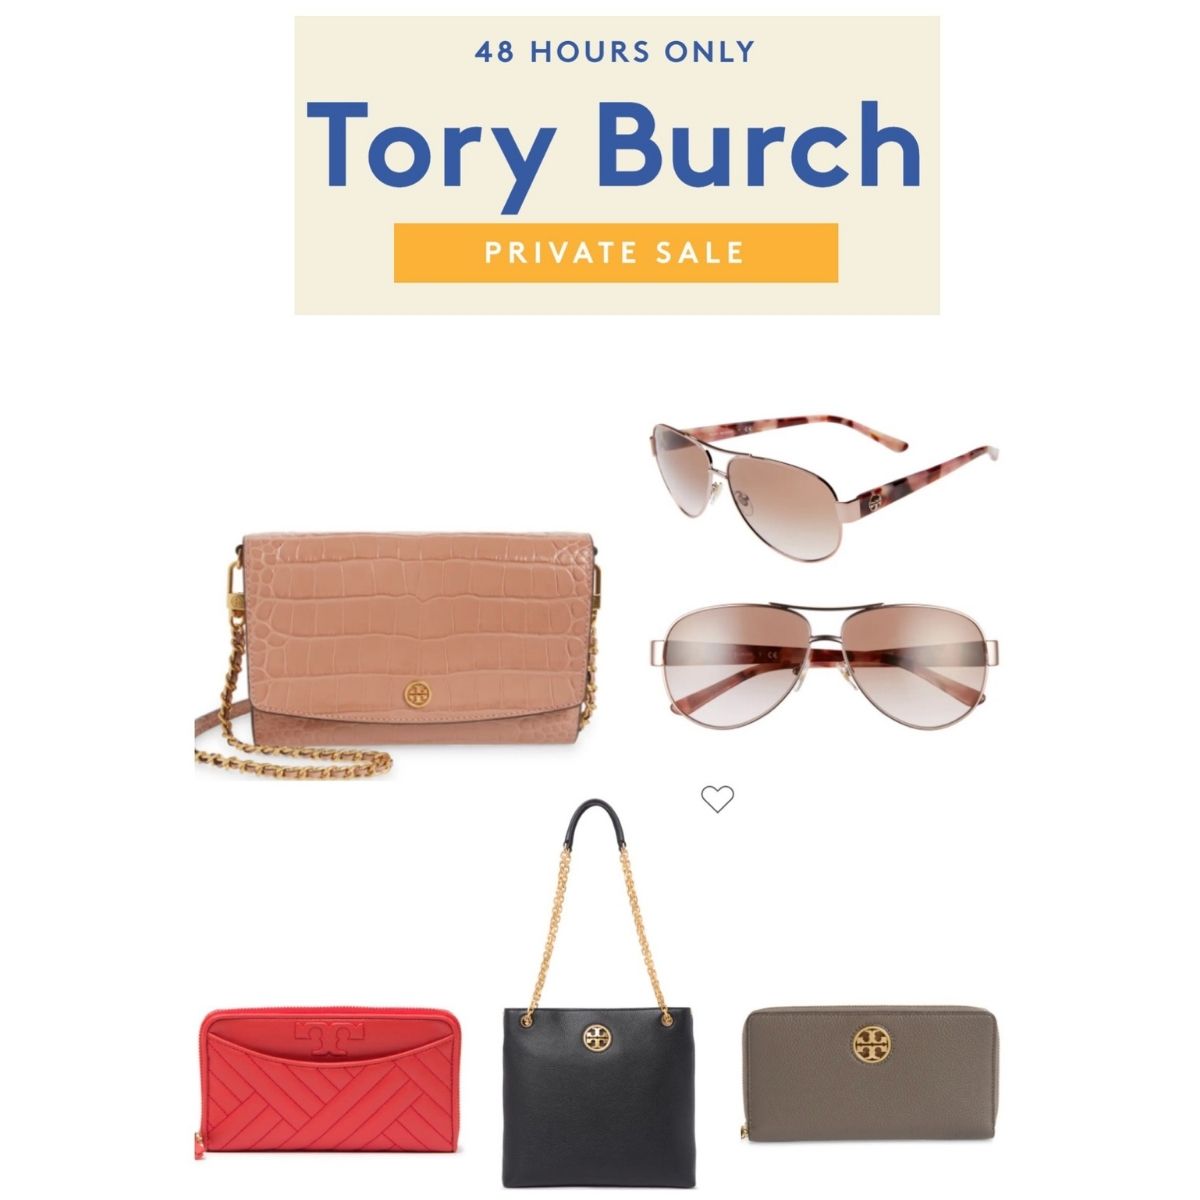 48 hours only - Tory Burch private sale at Nordstrom Rack | Smart Savers